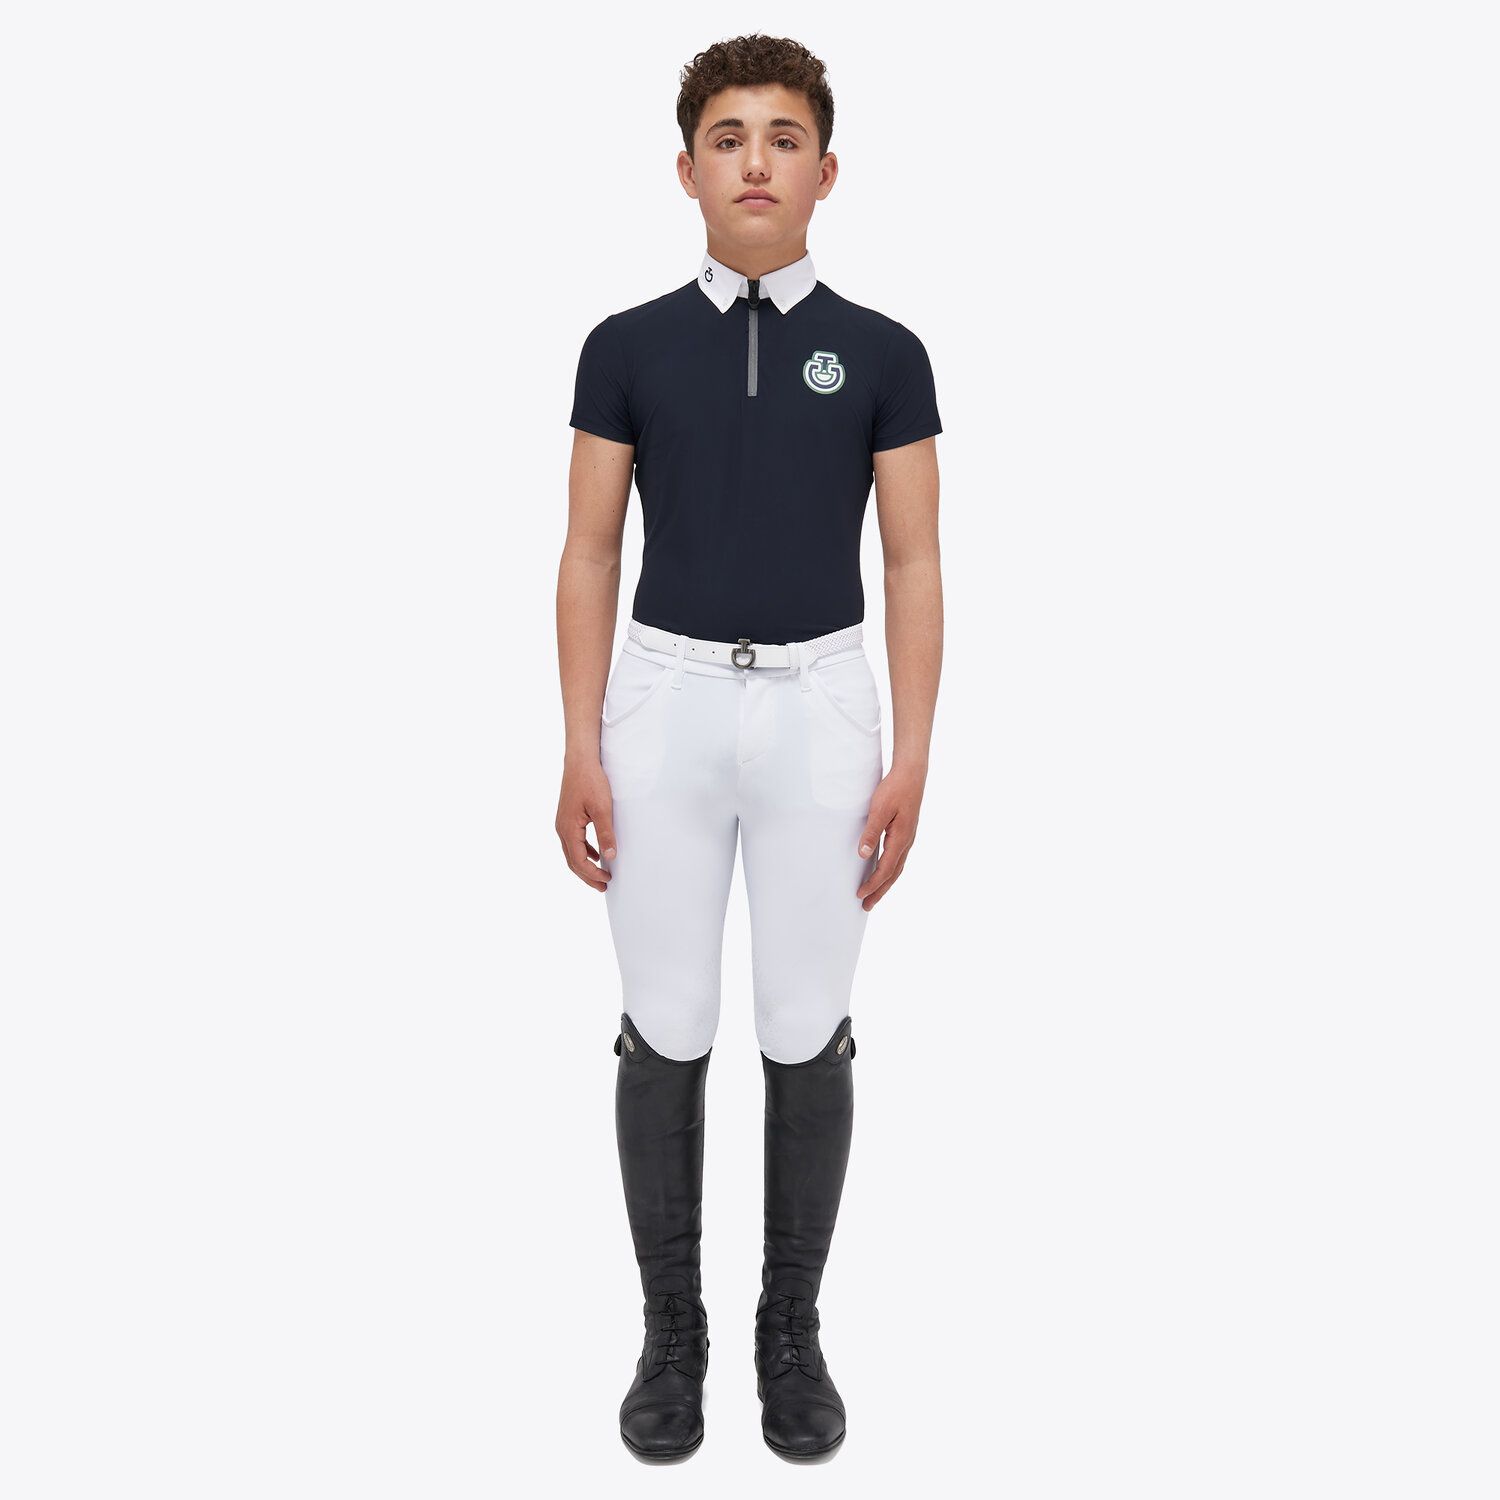 Cavalleria Toscana Boys’ jersey competition shirt with a zip NAVY-1